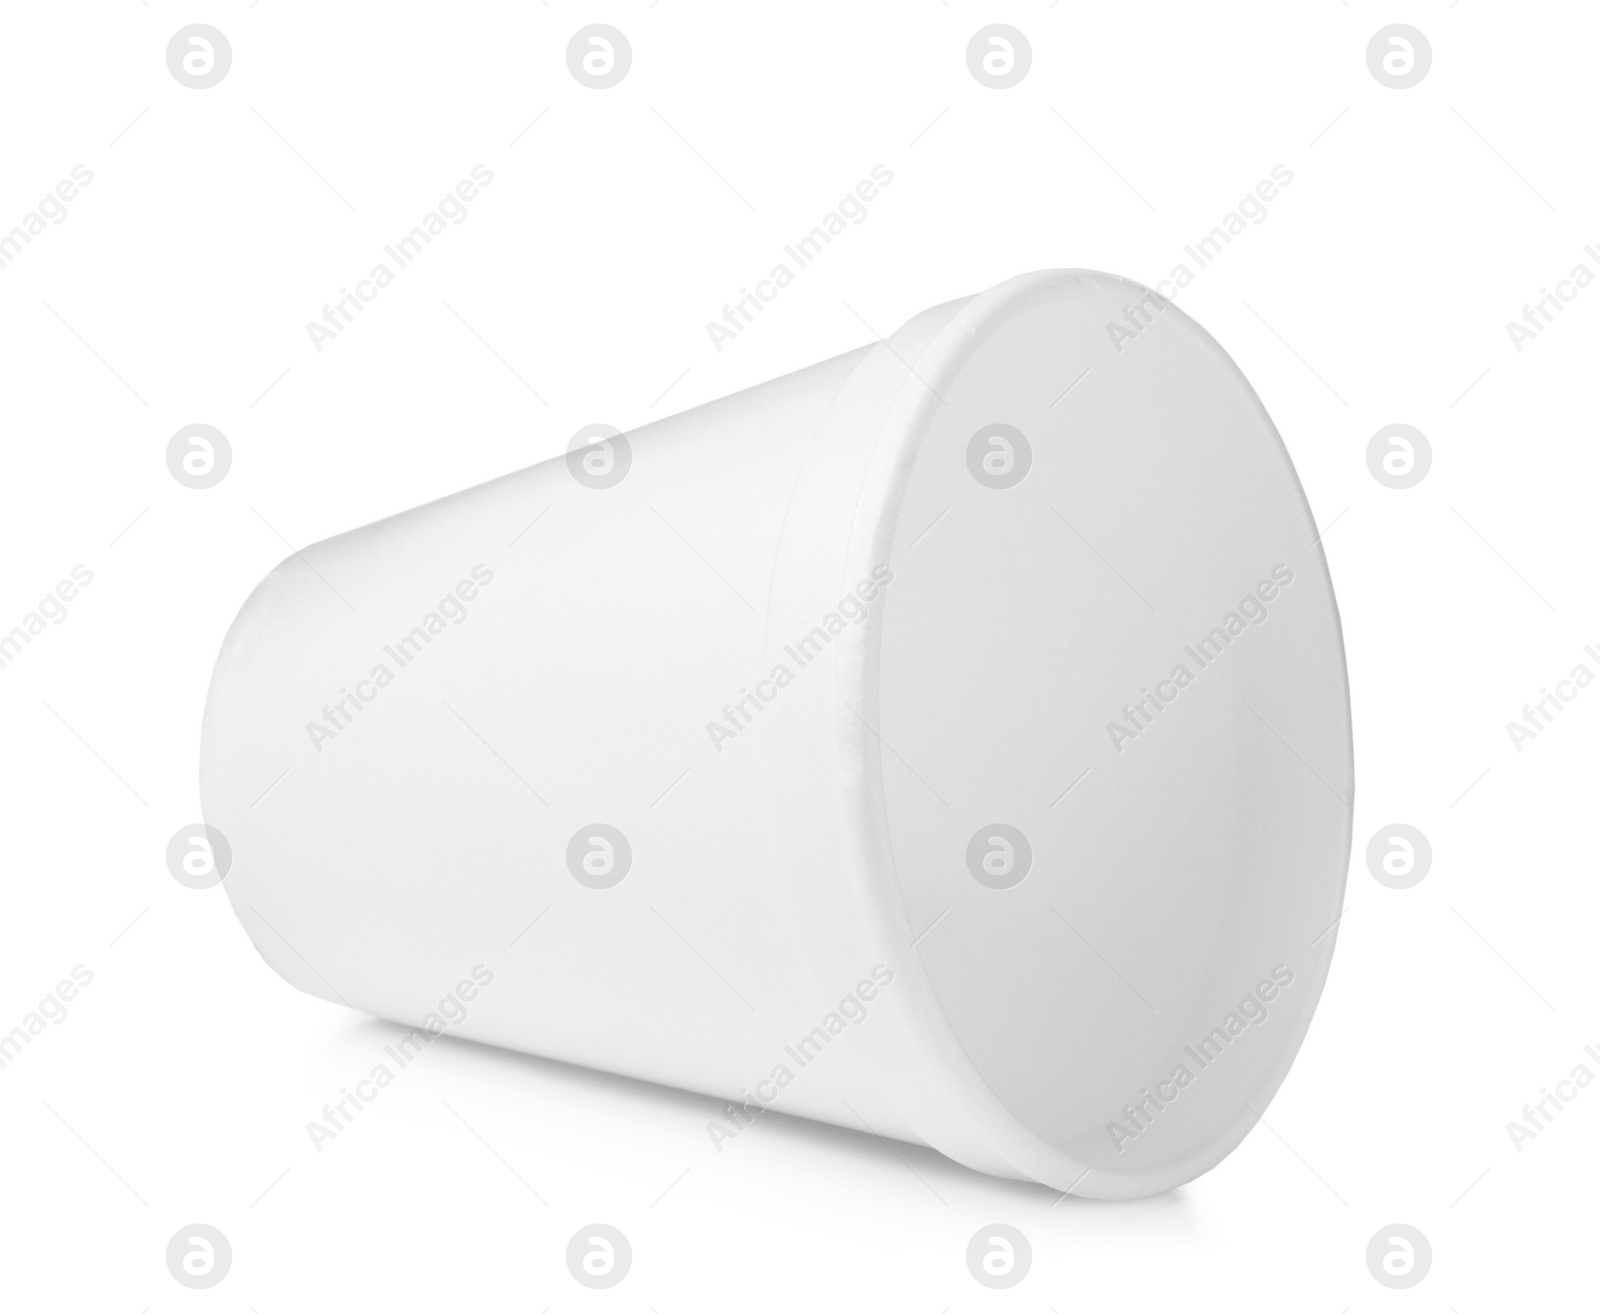 Photo of One clean styrofoam cup isolated on white